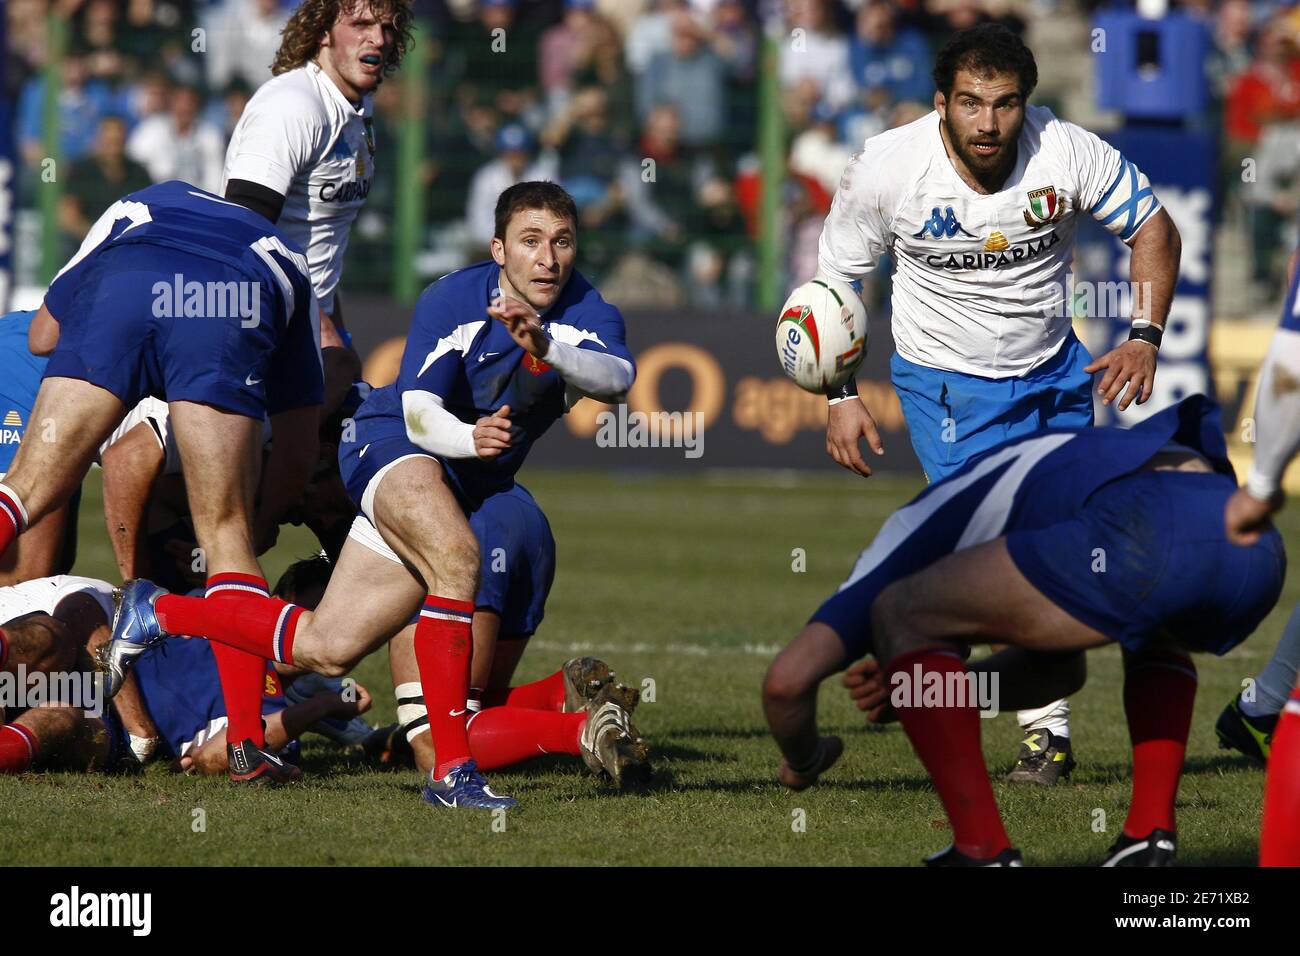 France's Pierre Mignoni during the RBS 6 Nations match, Ireland vs France  at Croke Park in Dublin, Ireland on February 11, 2007. France won 20-17.  Photo by Christian Liewig/ABACAPRESS.COM Stock Photo - Alamy